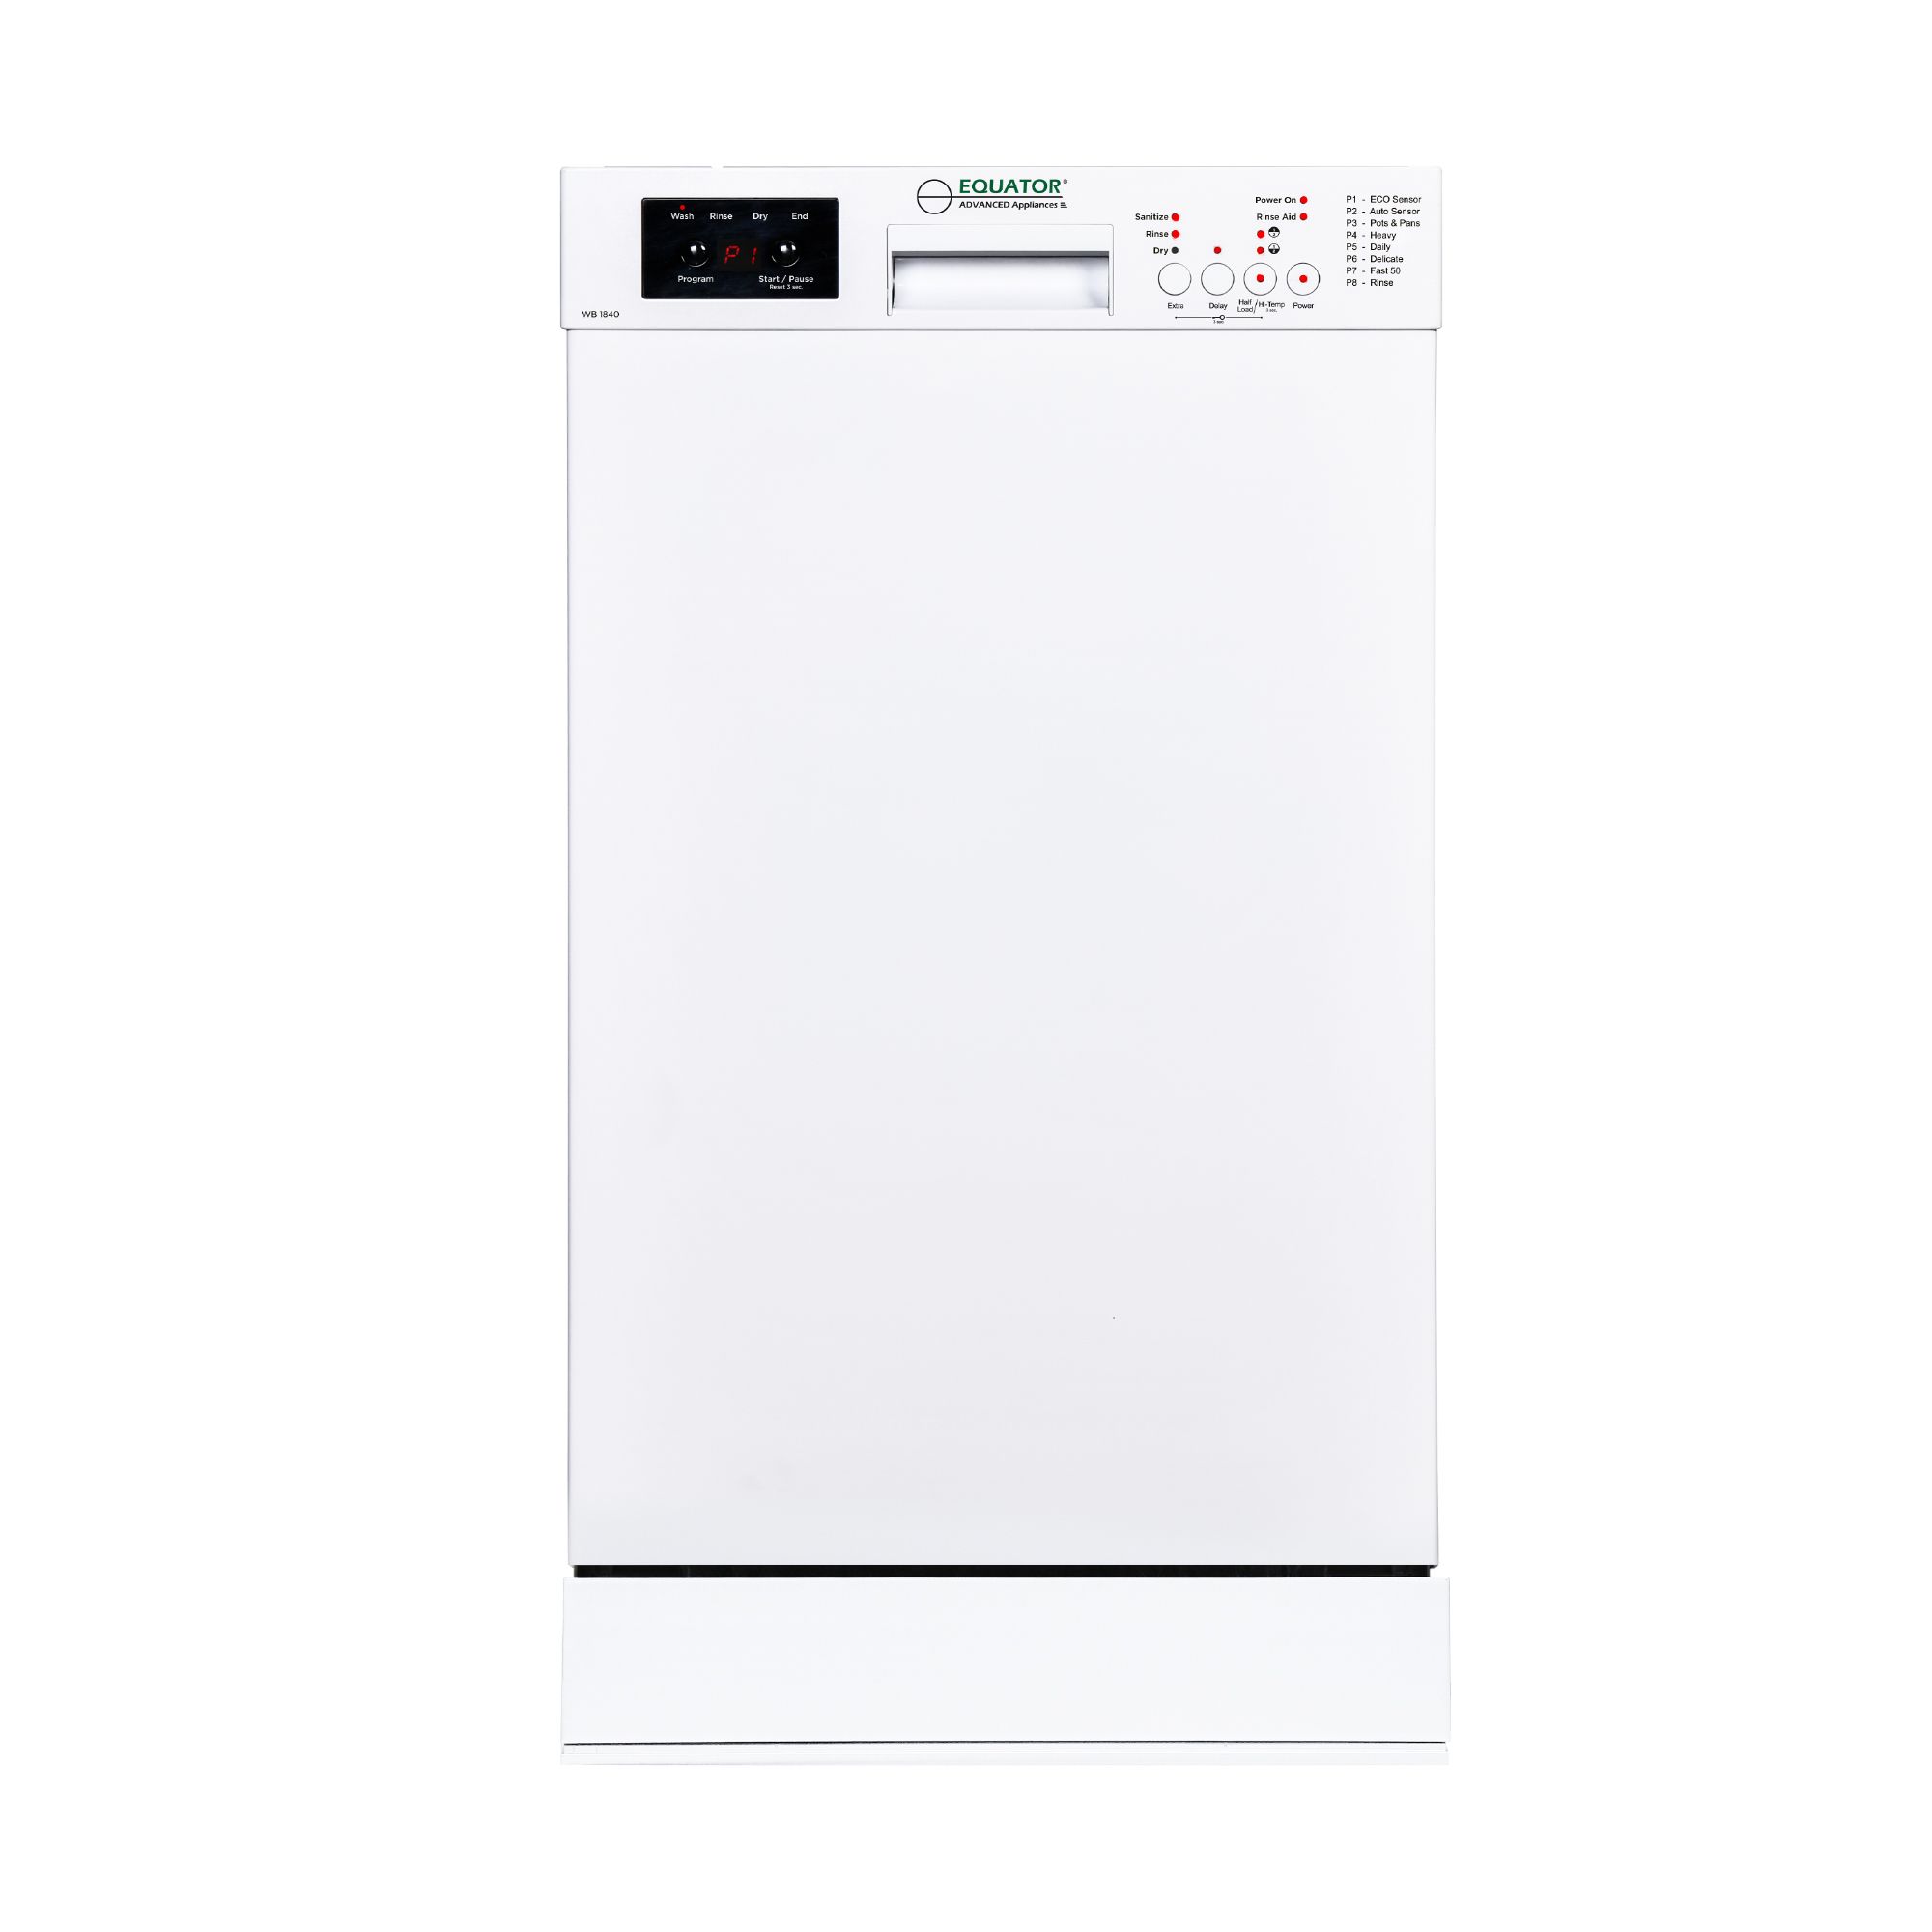 Equator Advanced Appliances WB 1840 Equator 18&' Built-In Dishwasher 8 Place Settings & 8 Wash Programs in White